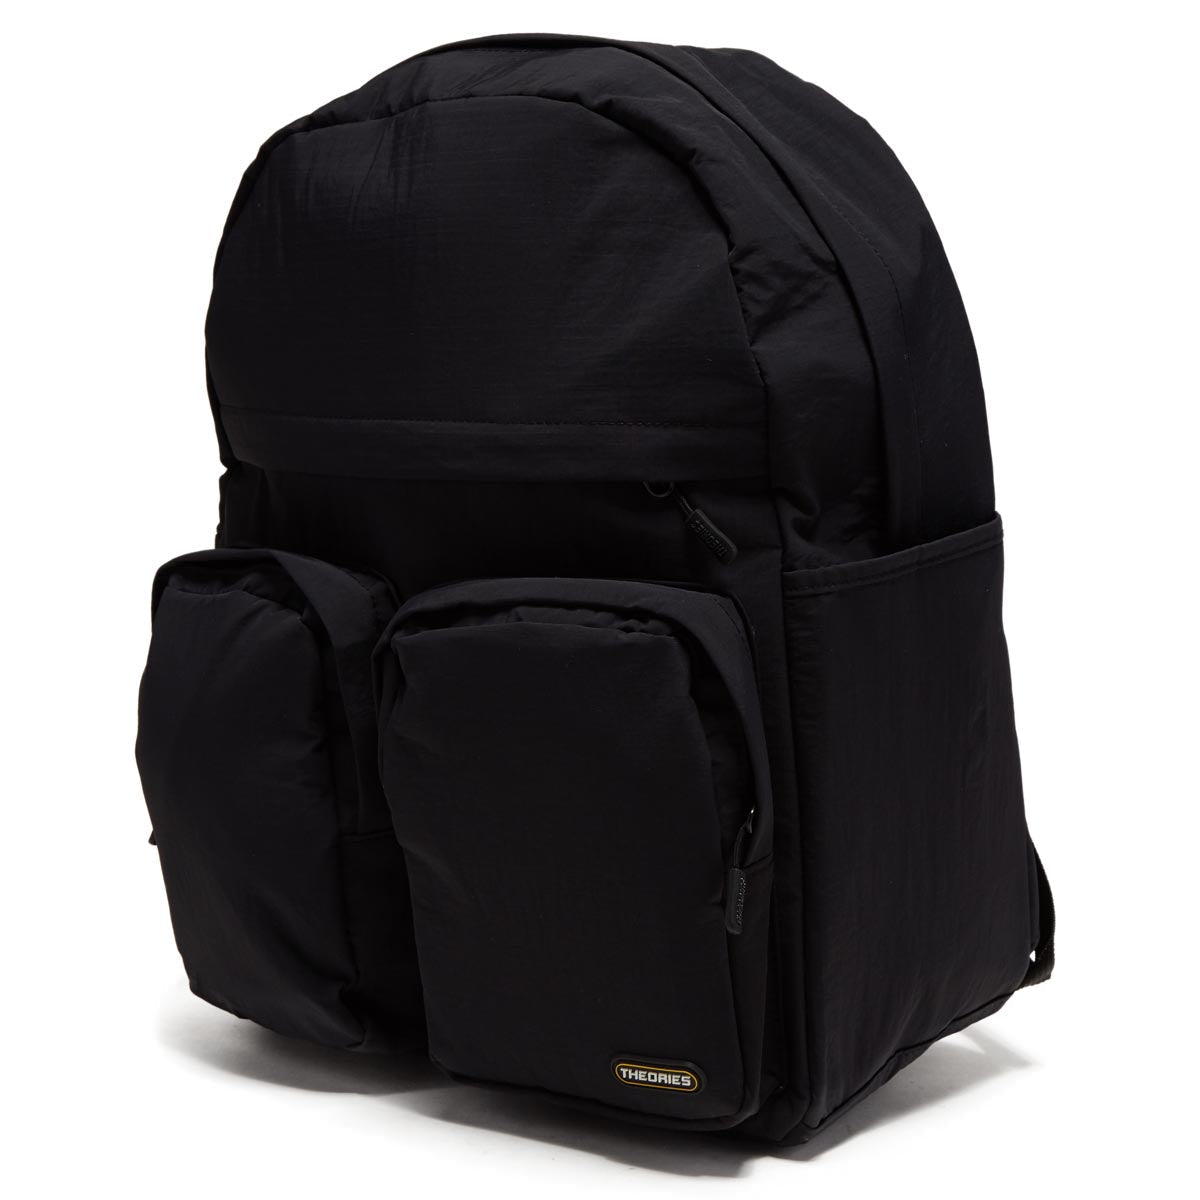 Theories Ripstop Trail Backpack - Black image 3